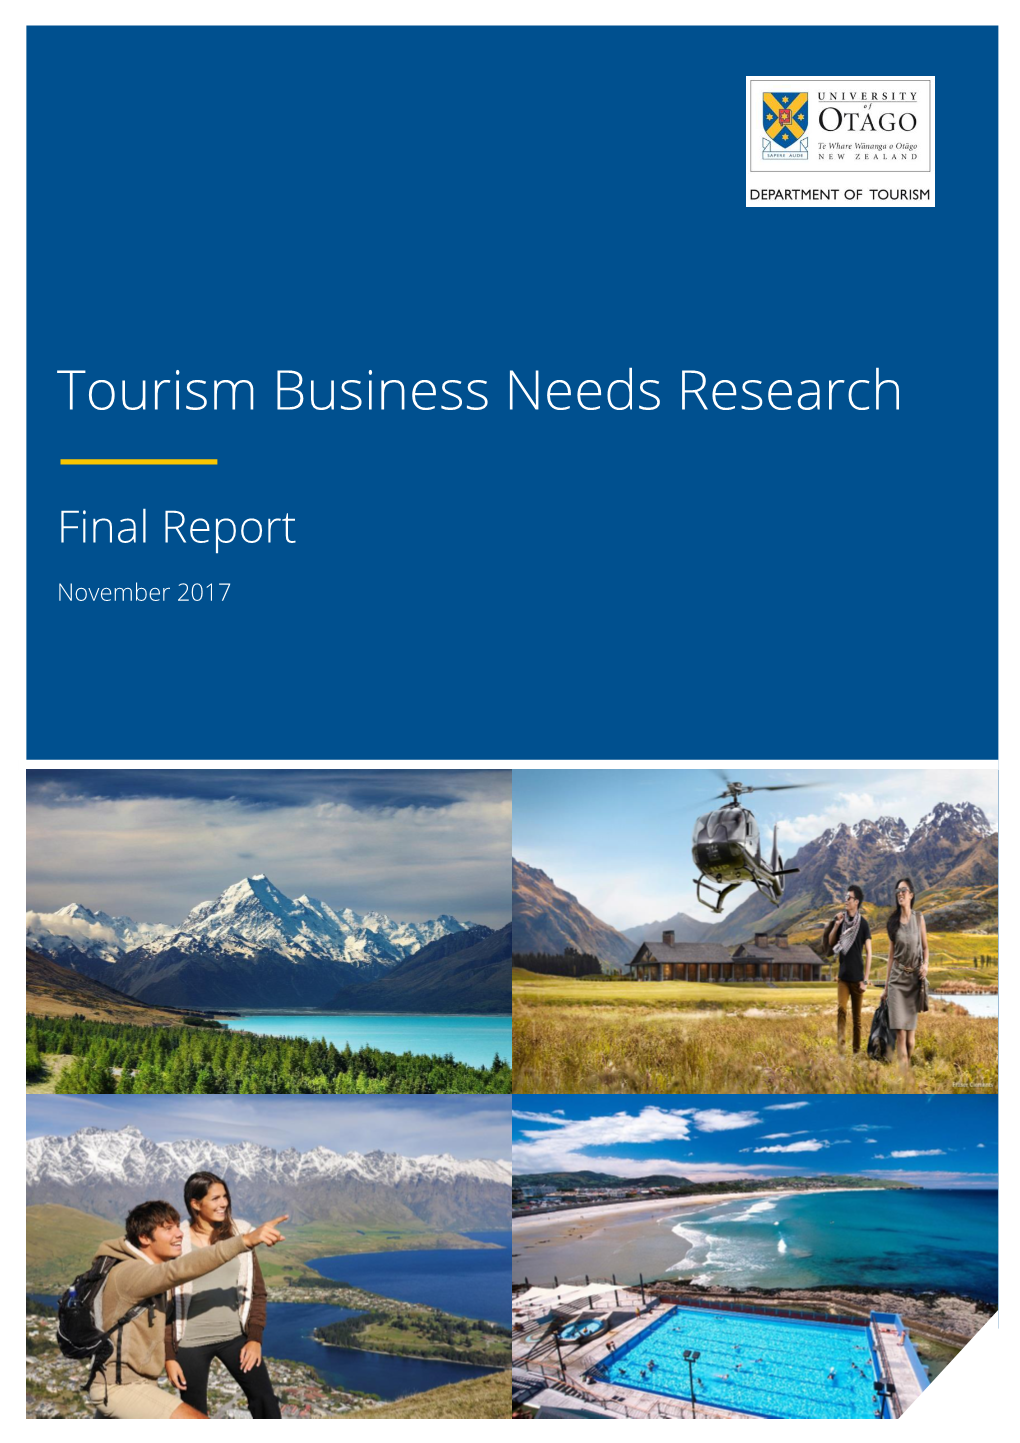 Tourism Business Needs Research